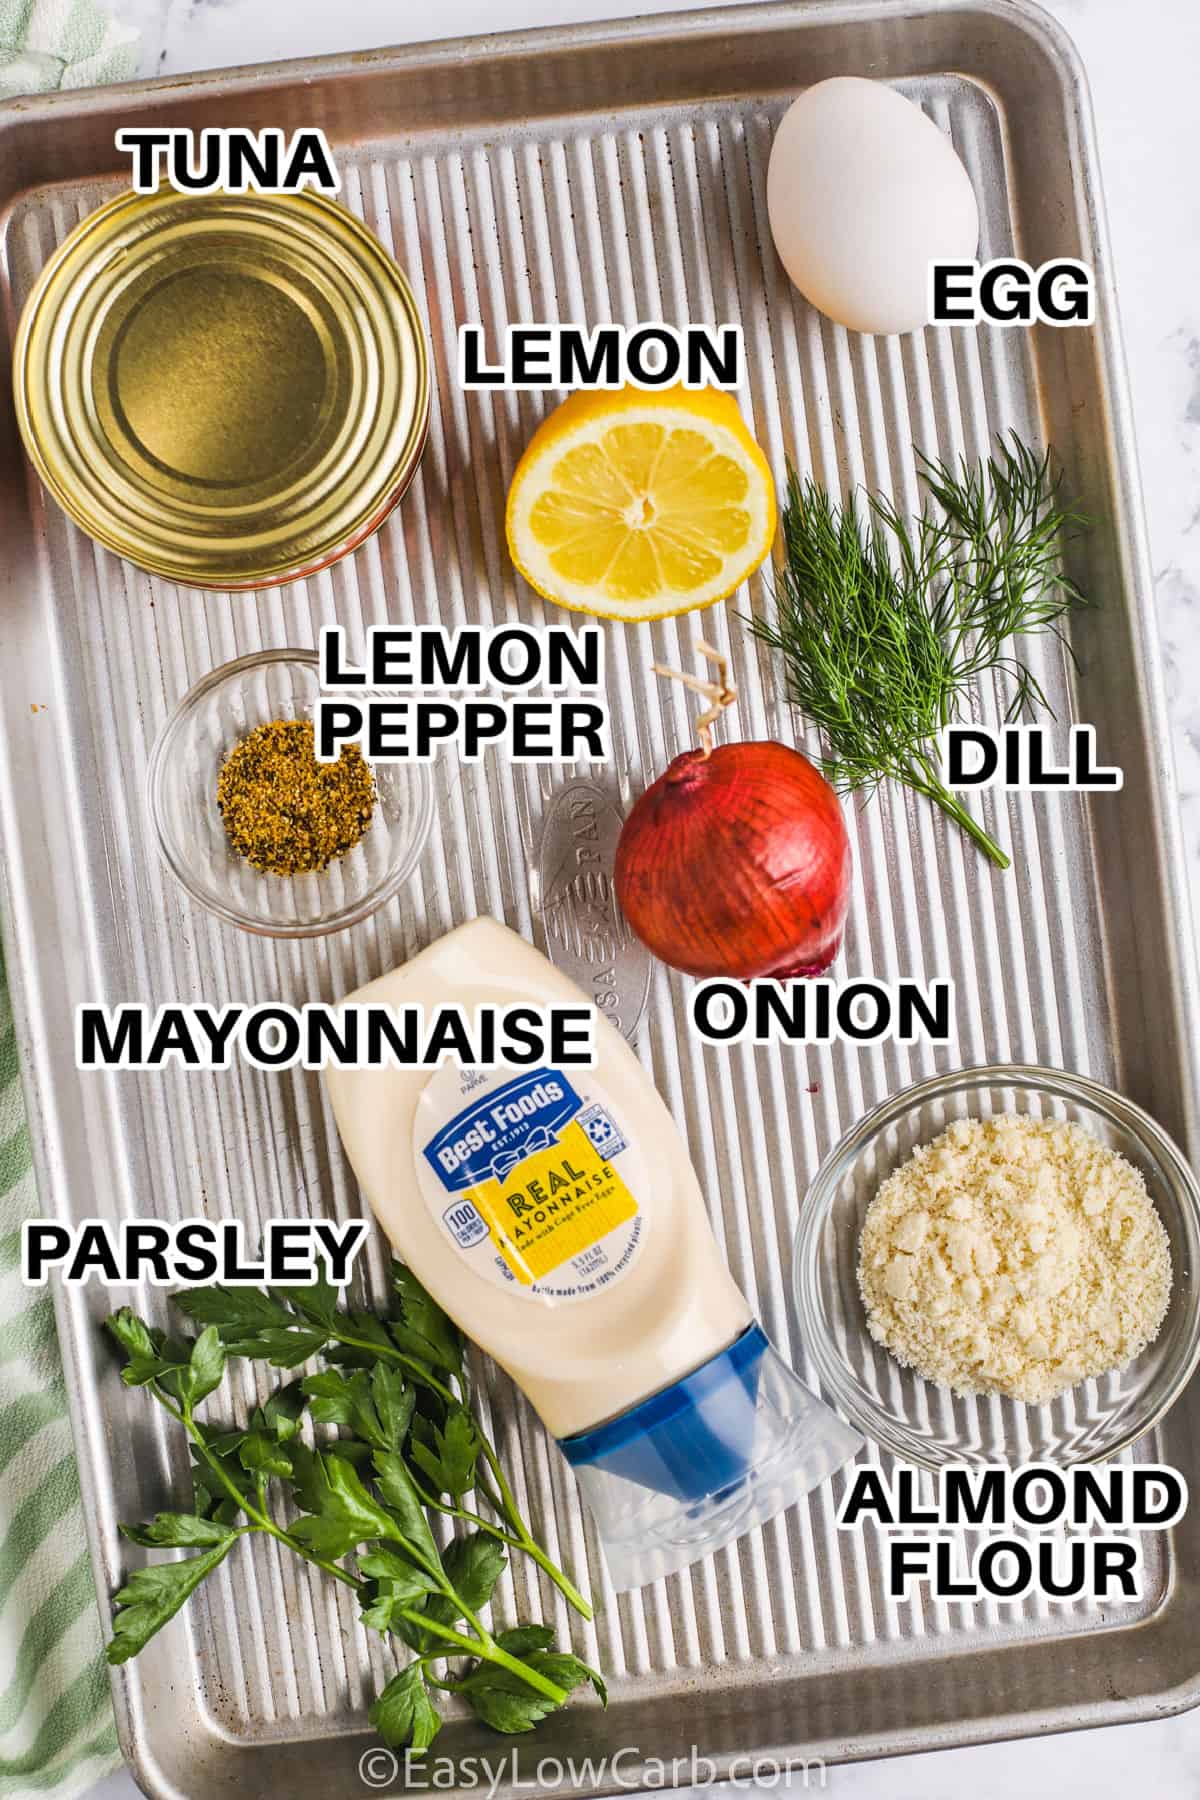 tuna, mayonnaise , egg , dill , flour and other ingredients to make Tuna Cakes with labels